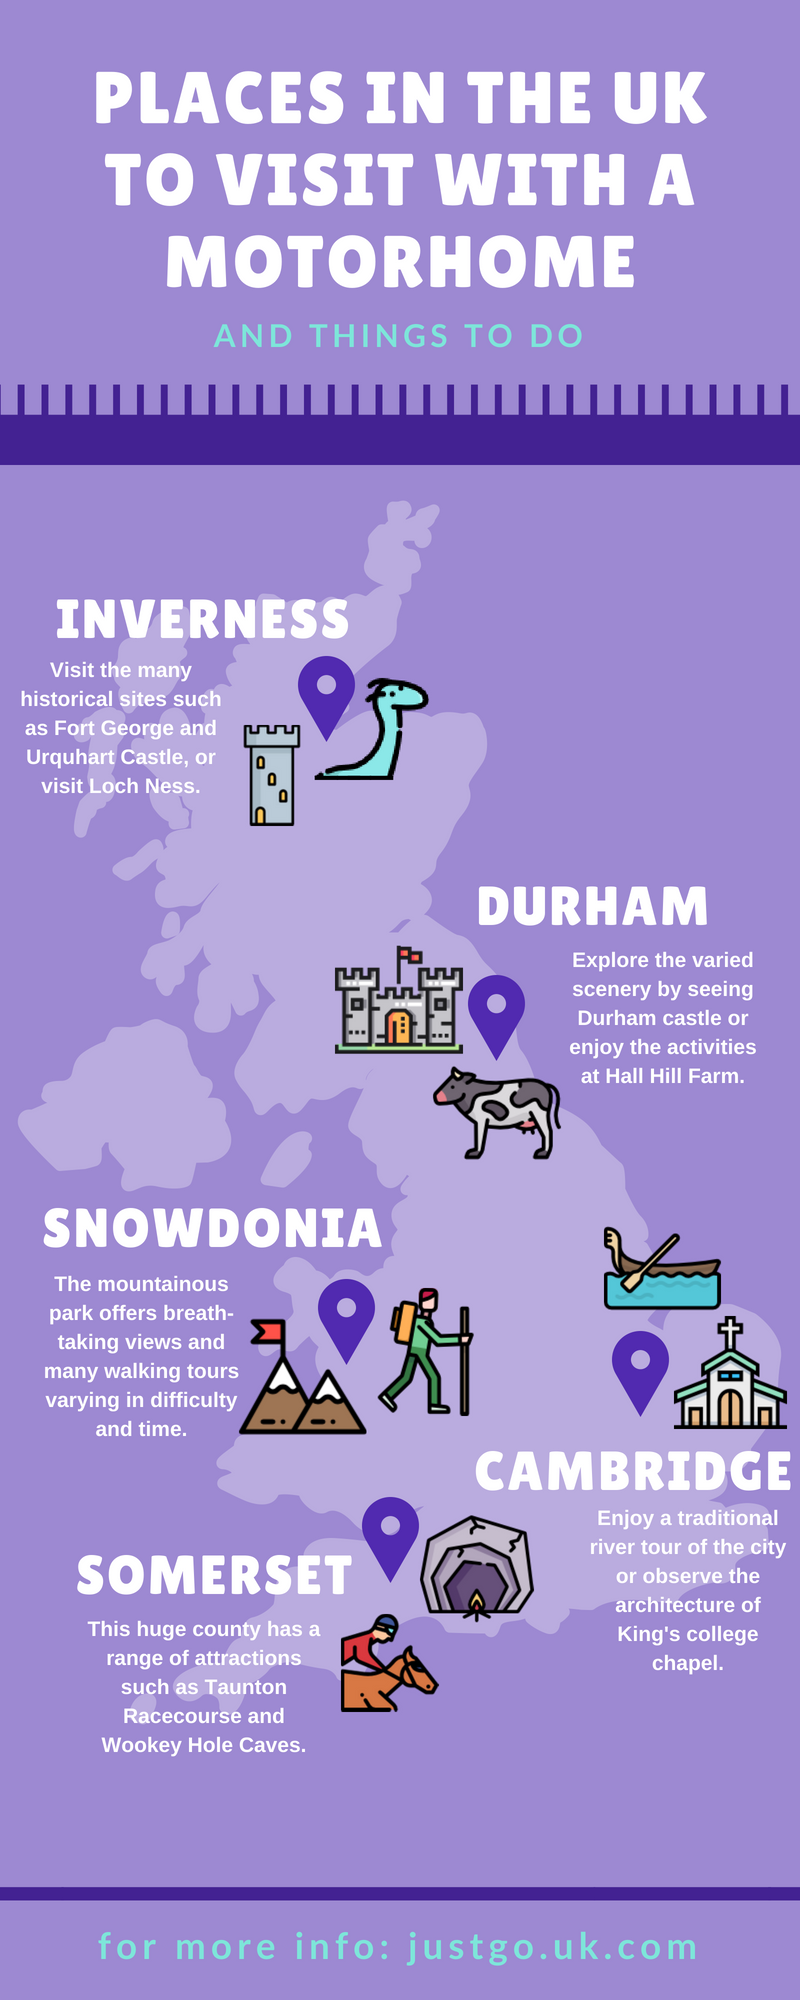 rv-hire-places-in-the-uk-infographic-plaza